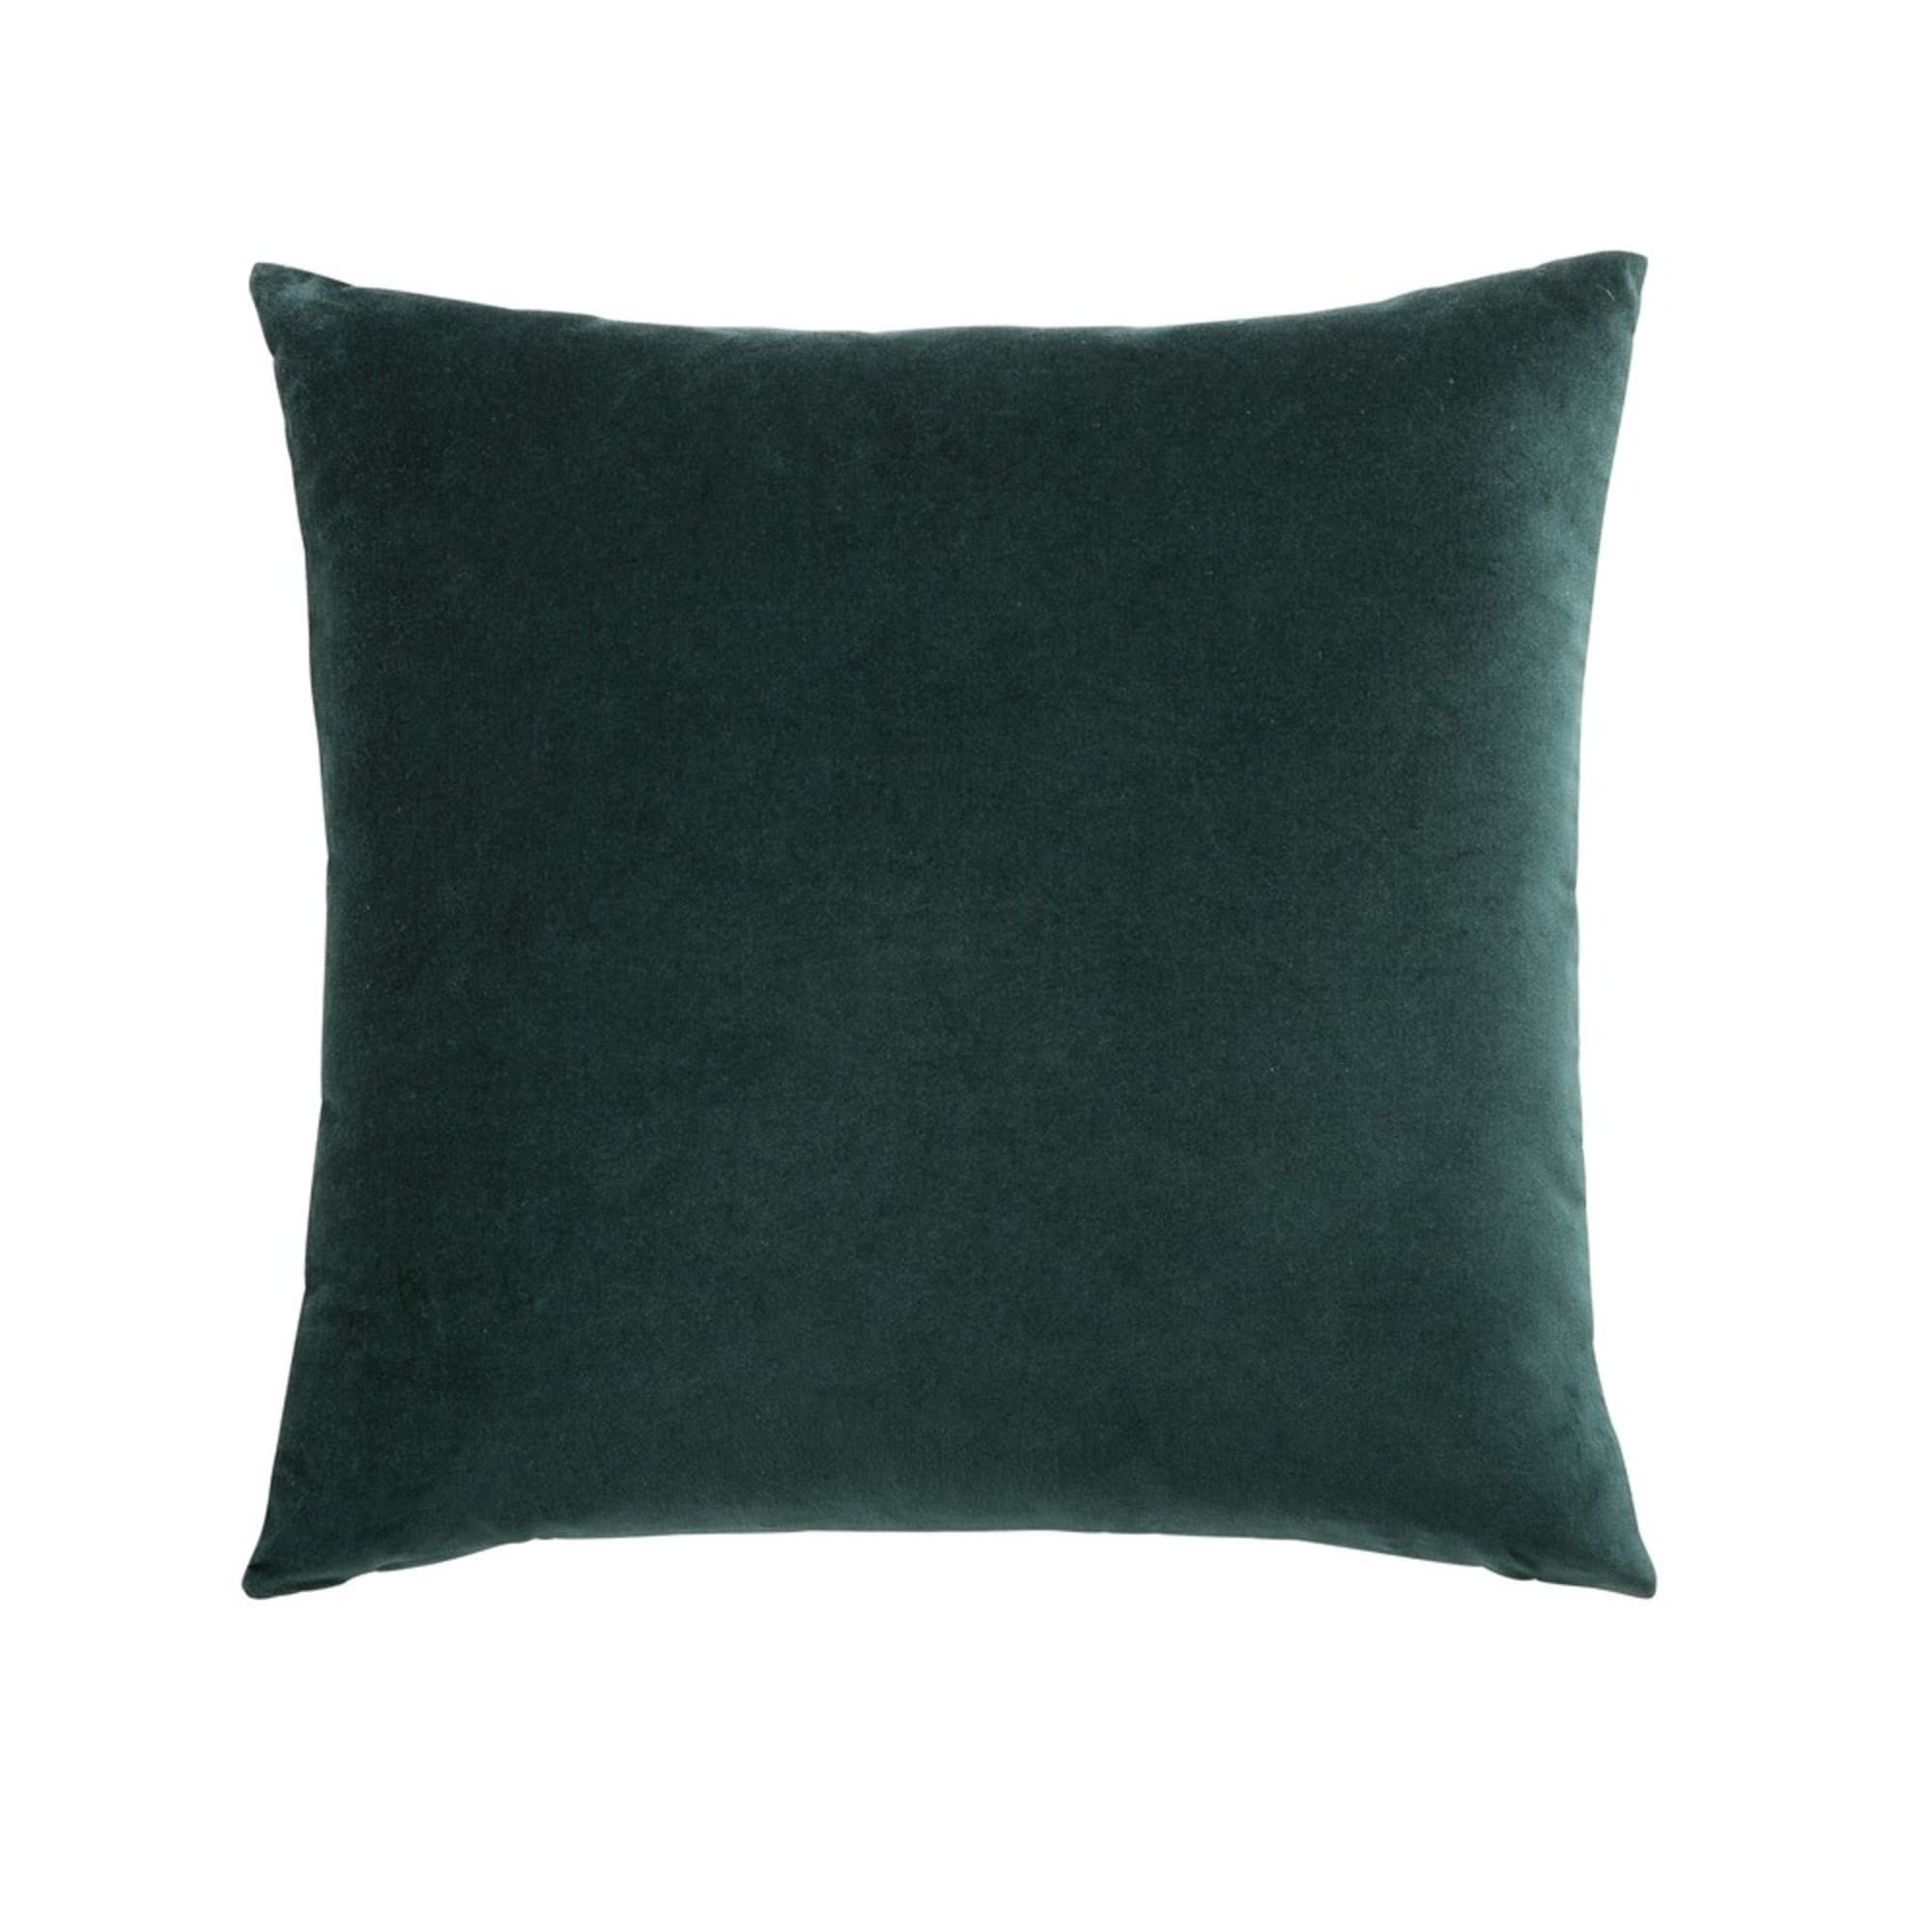 Rent a Cushion recycled? Rent at KeyPro furniture rental!